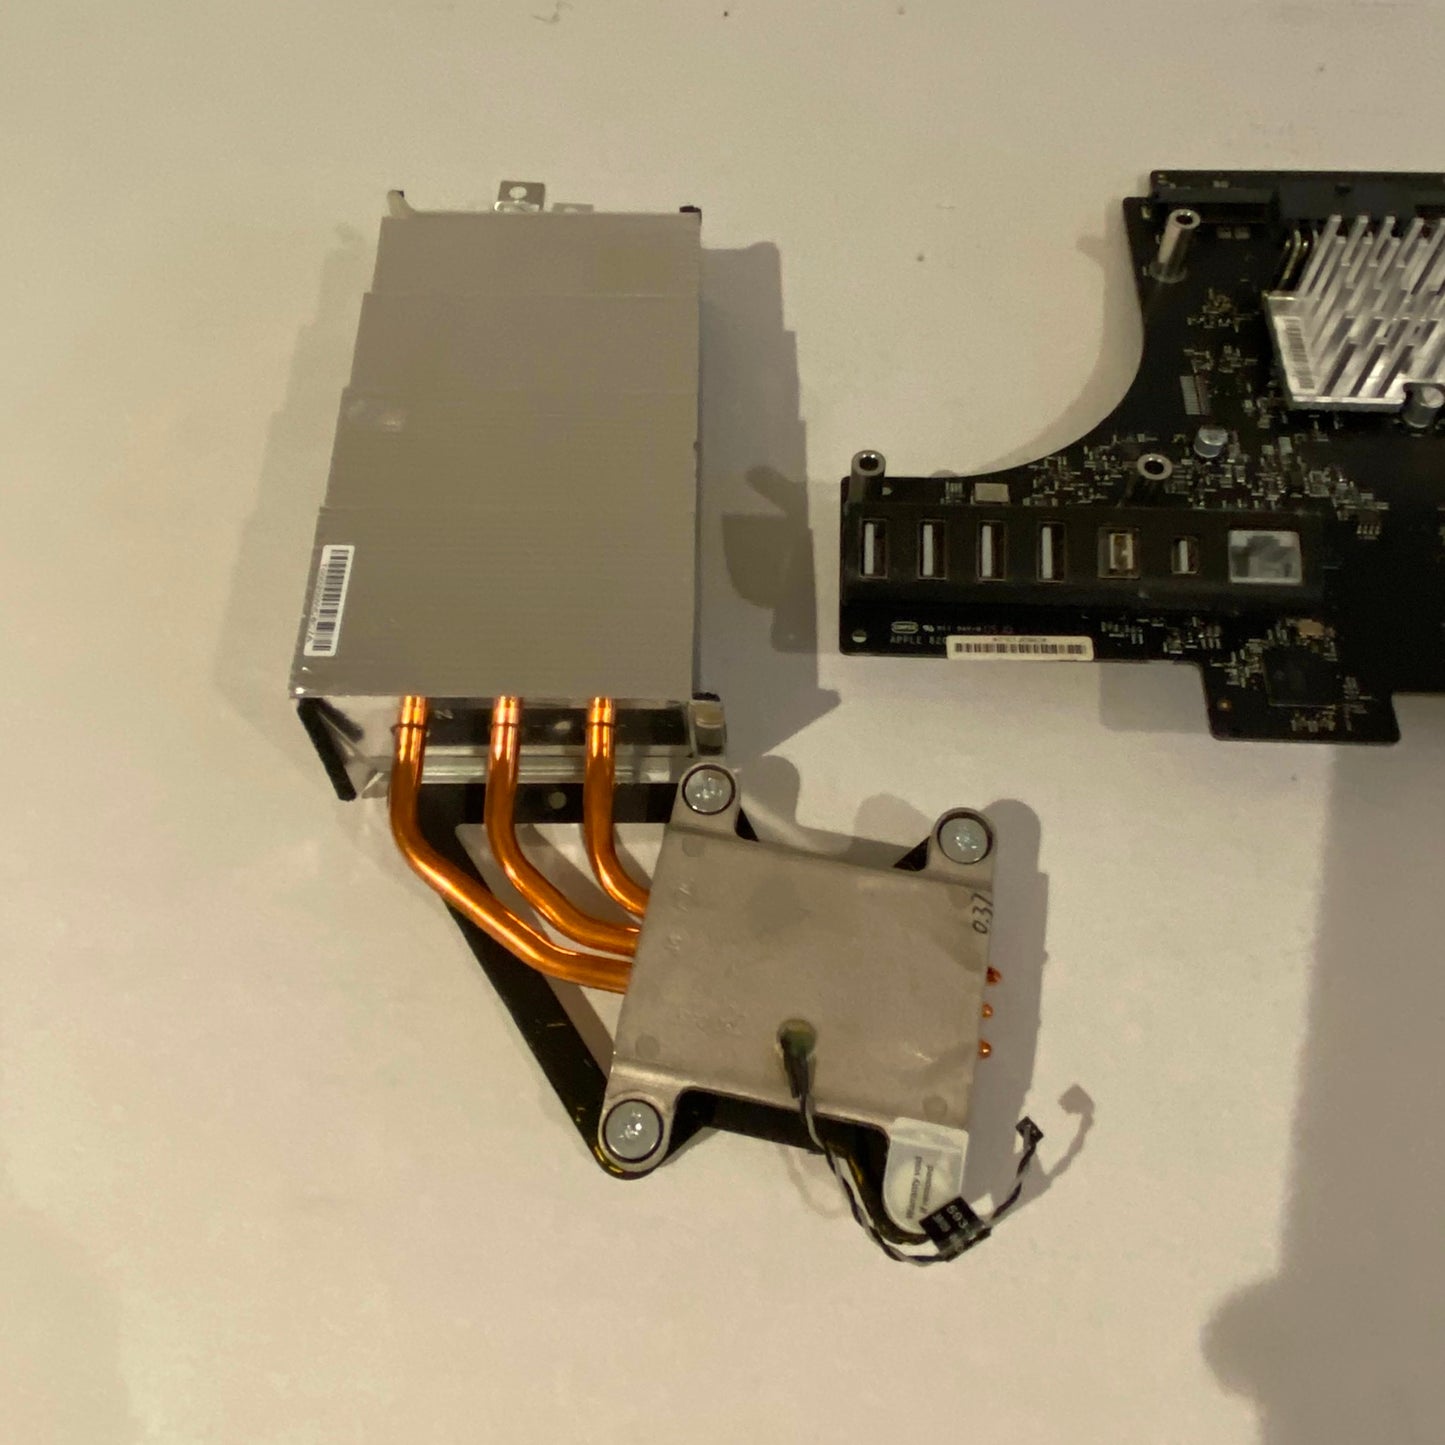 2009 27" iMac 3.06 Ghz Logic Board with CPU and Heat Sink